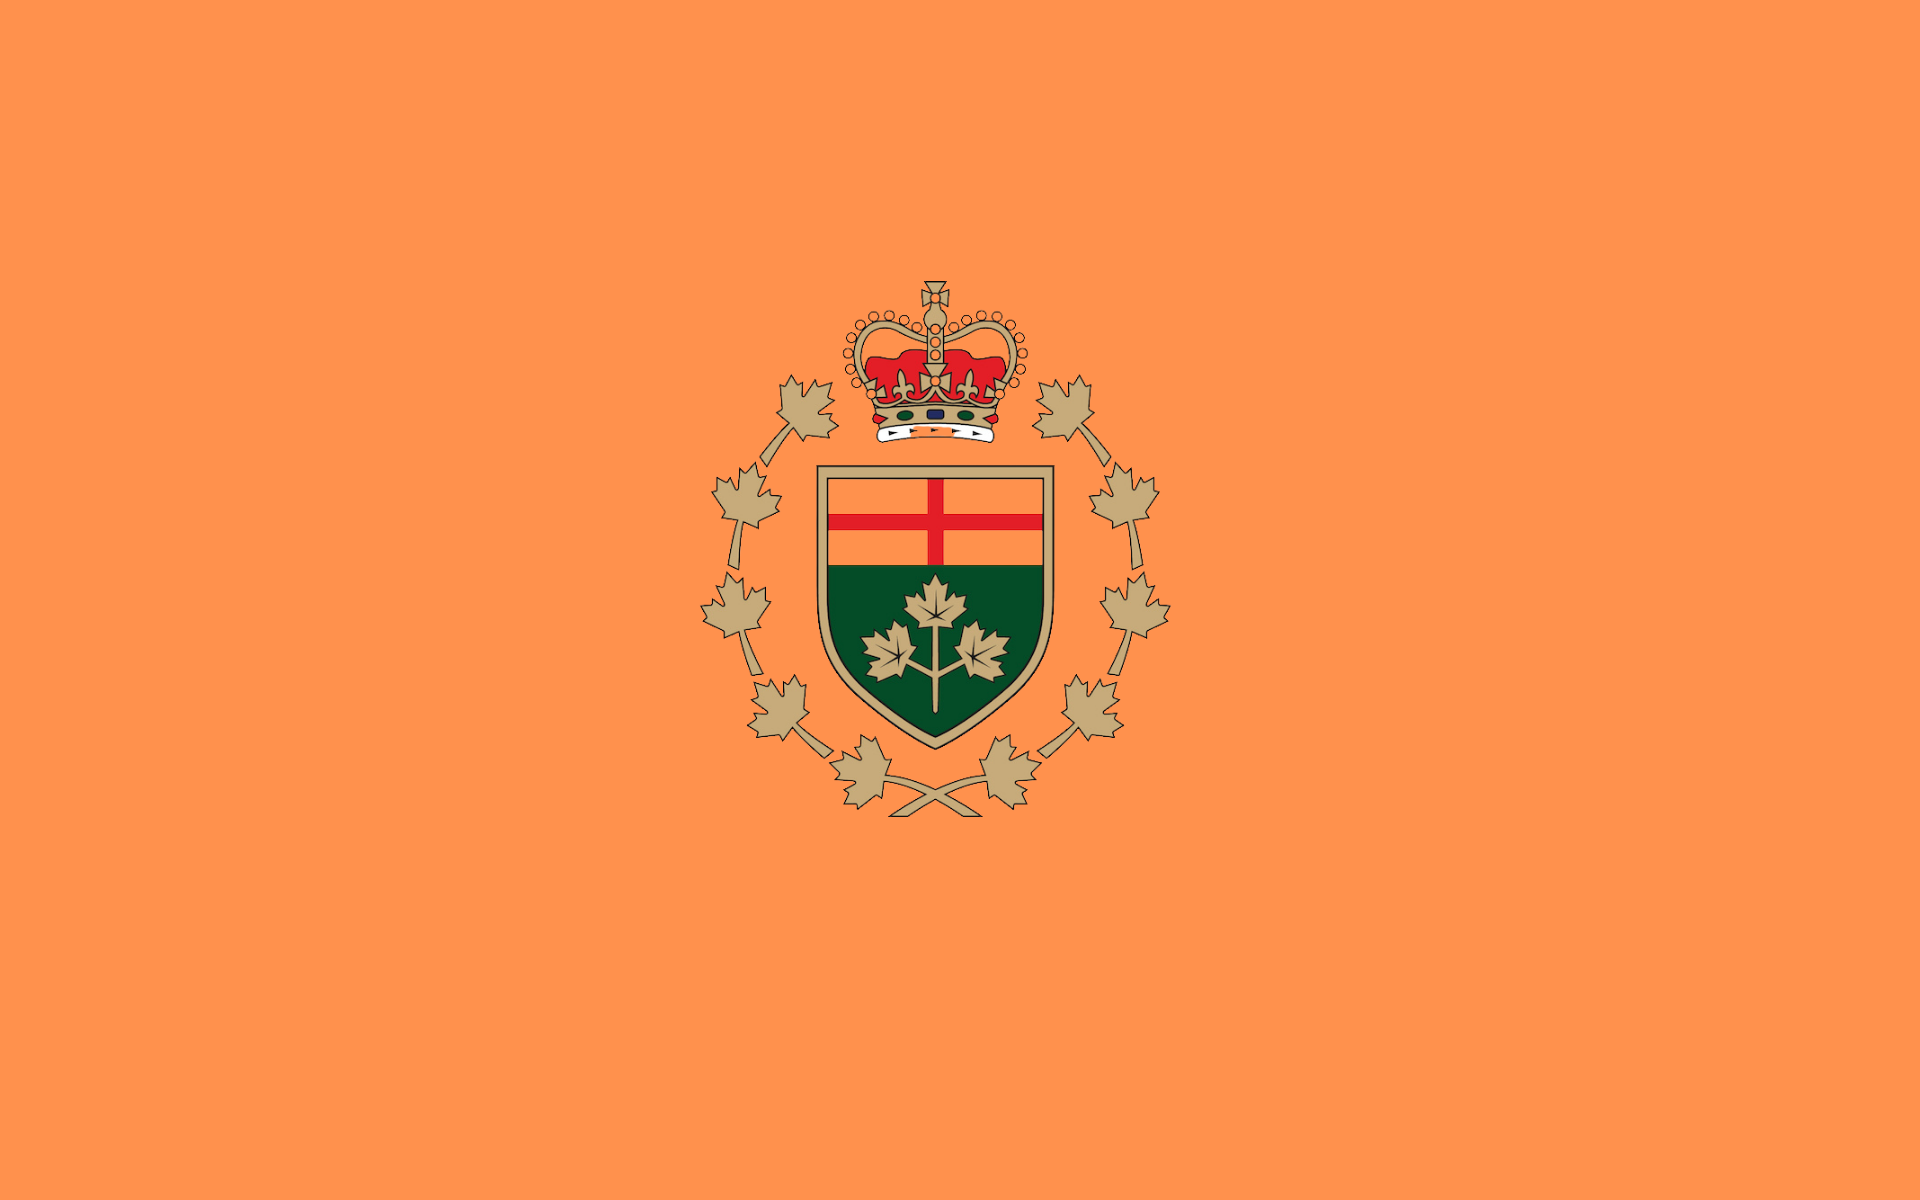 An orange square with the Crest of the Lieutenant Governor of Ontario in the centre